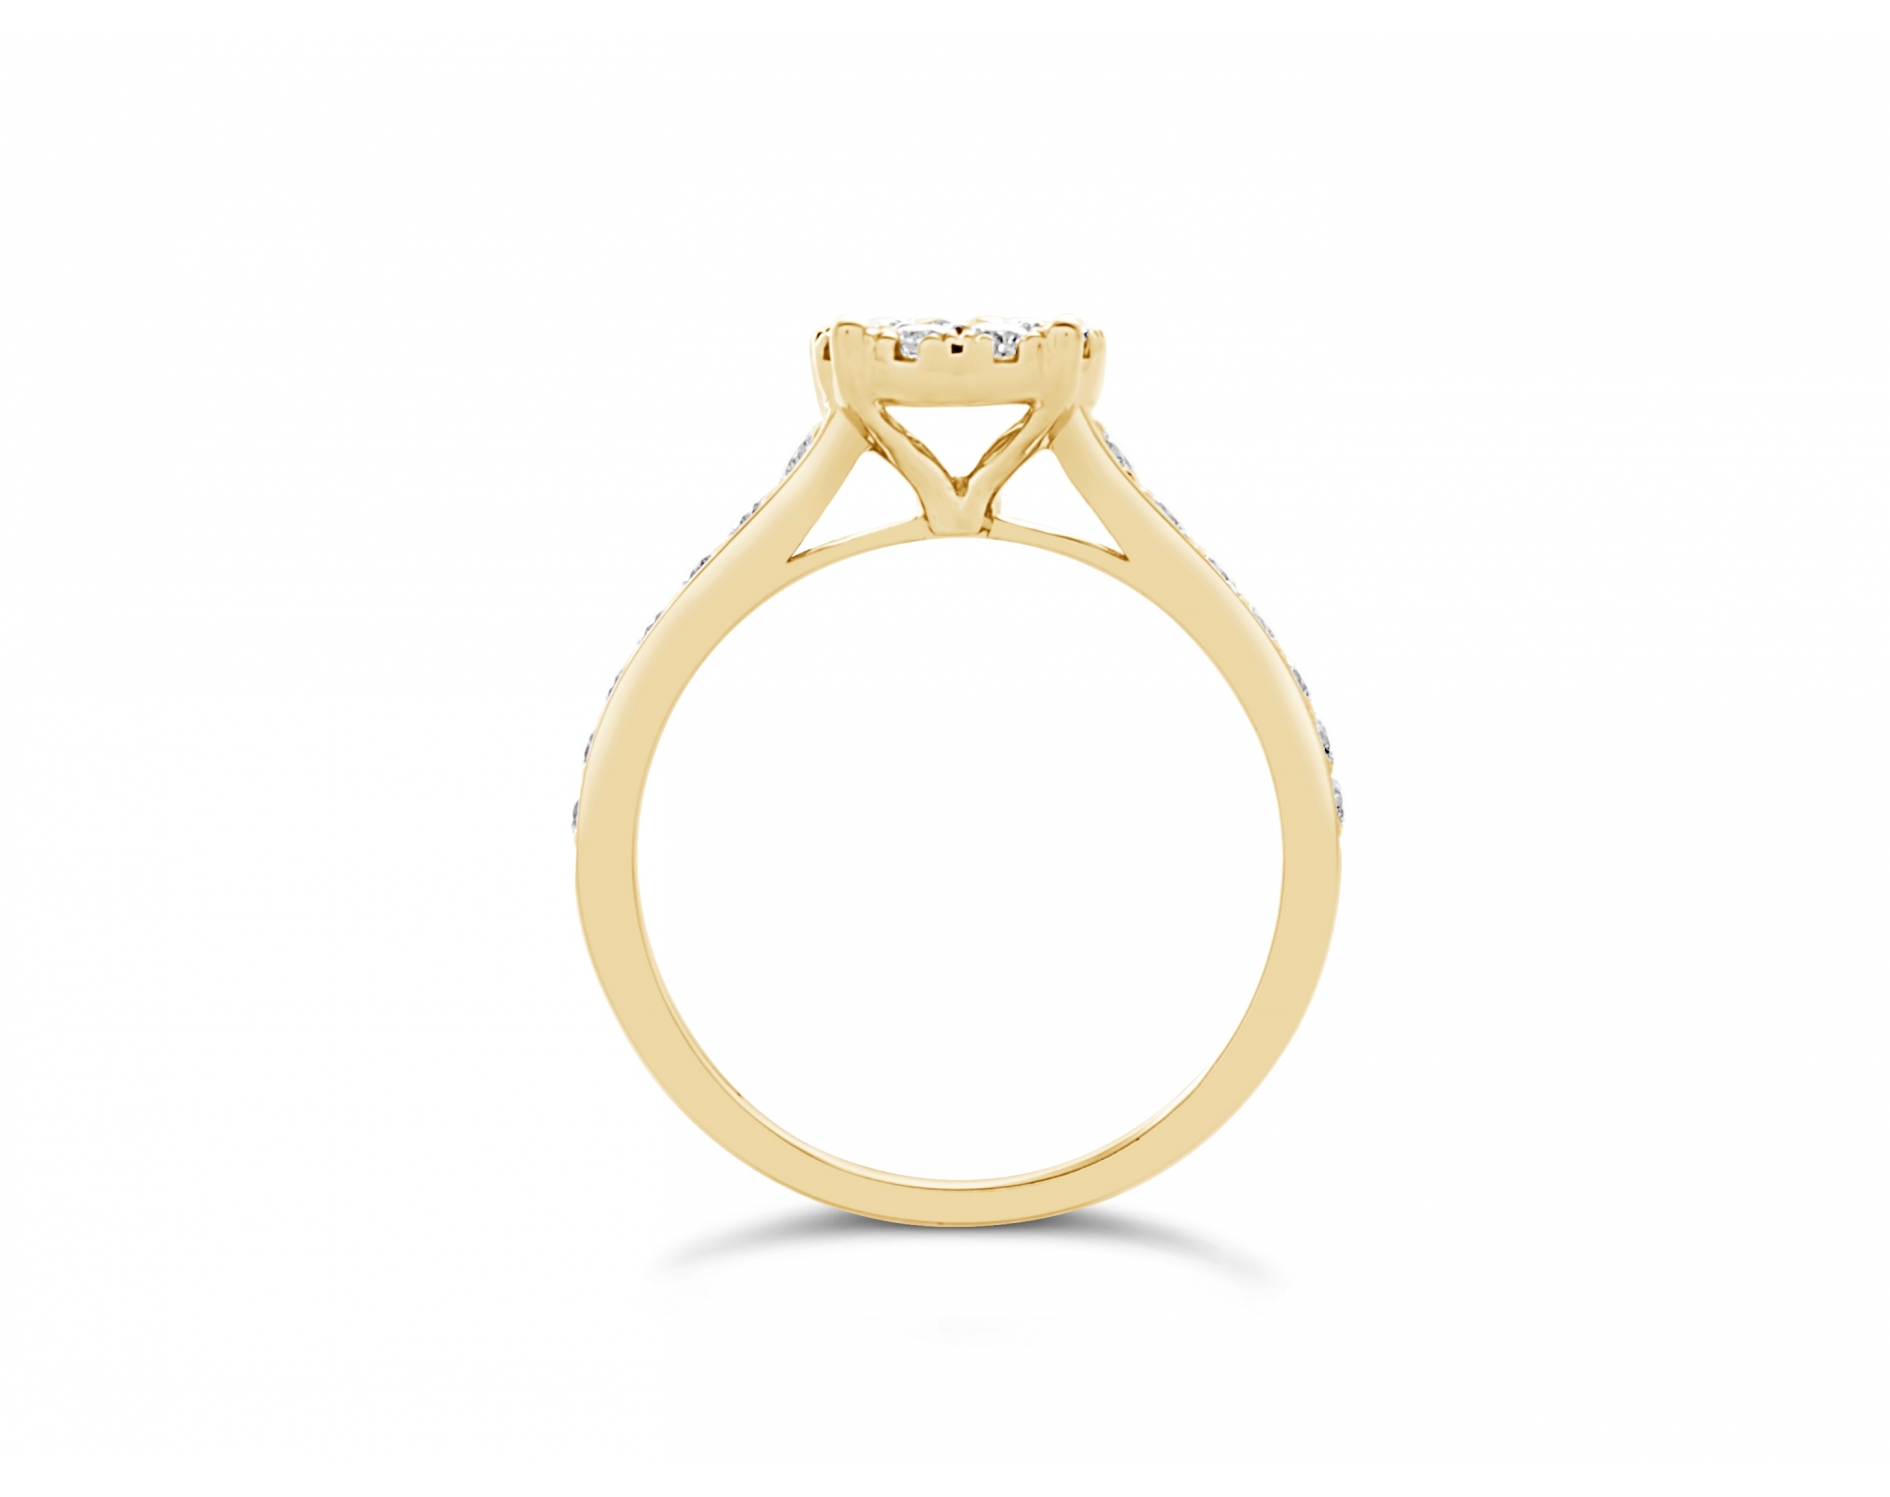 18k yellow gold halo illusion set engagement ring with round channel set diamonds